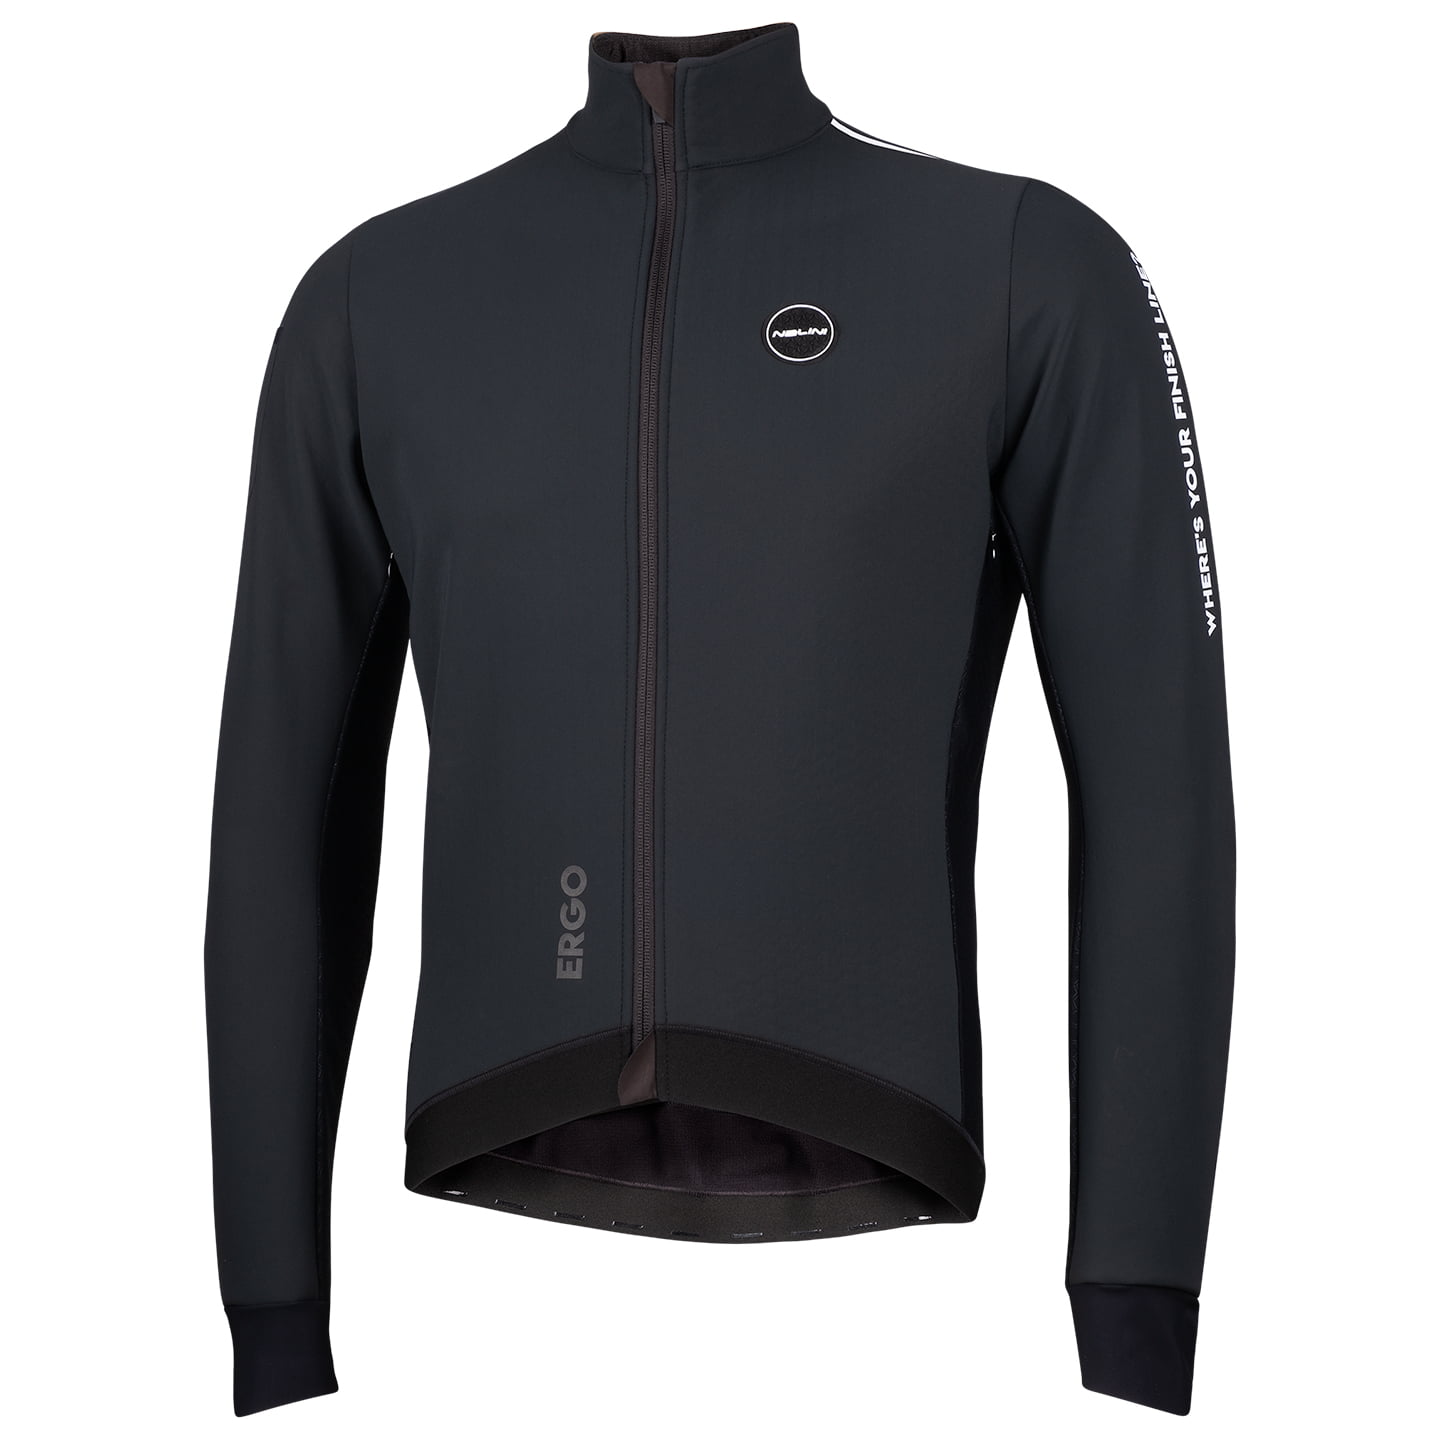 NALINI Winter Jacket New Ergo Warm Thermal Jacket, for men, size XL, Cycle jacket, Cycle gear